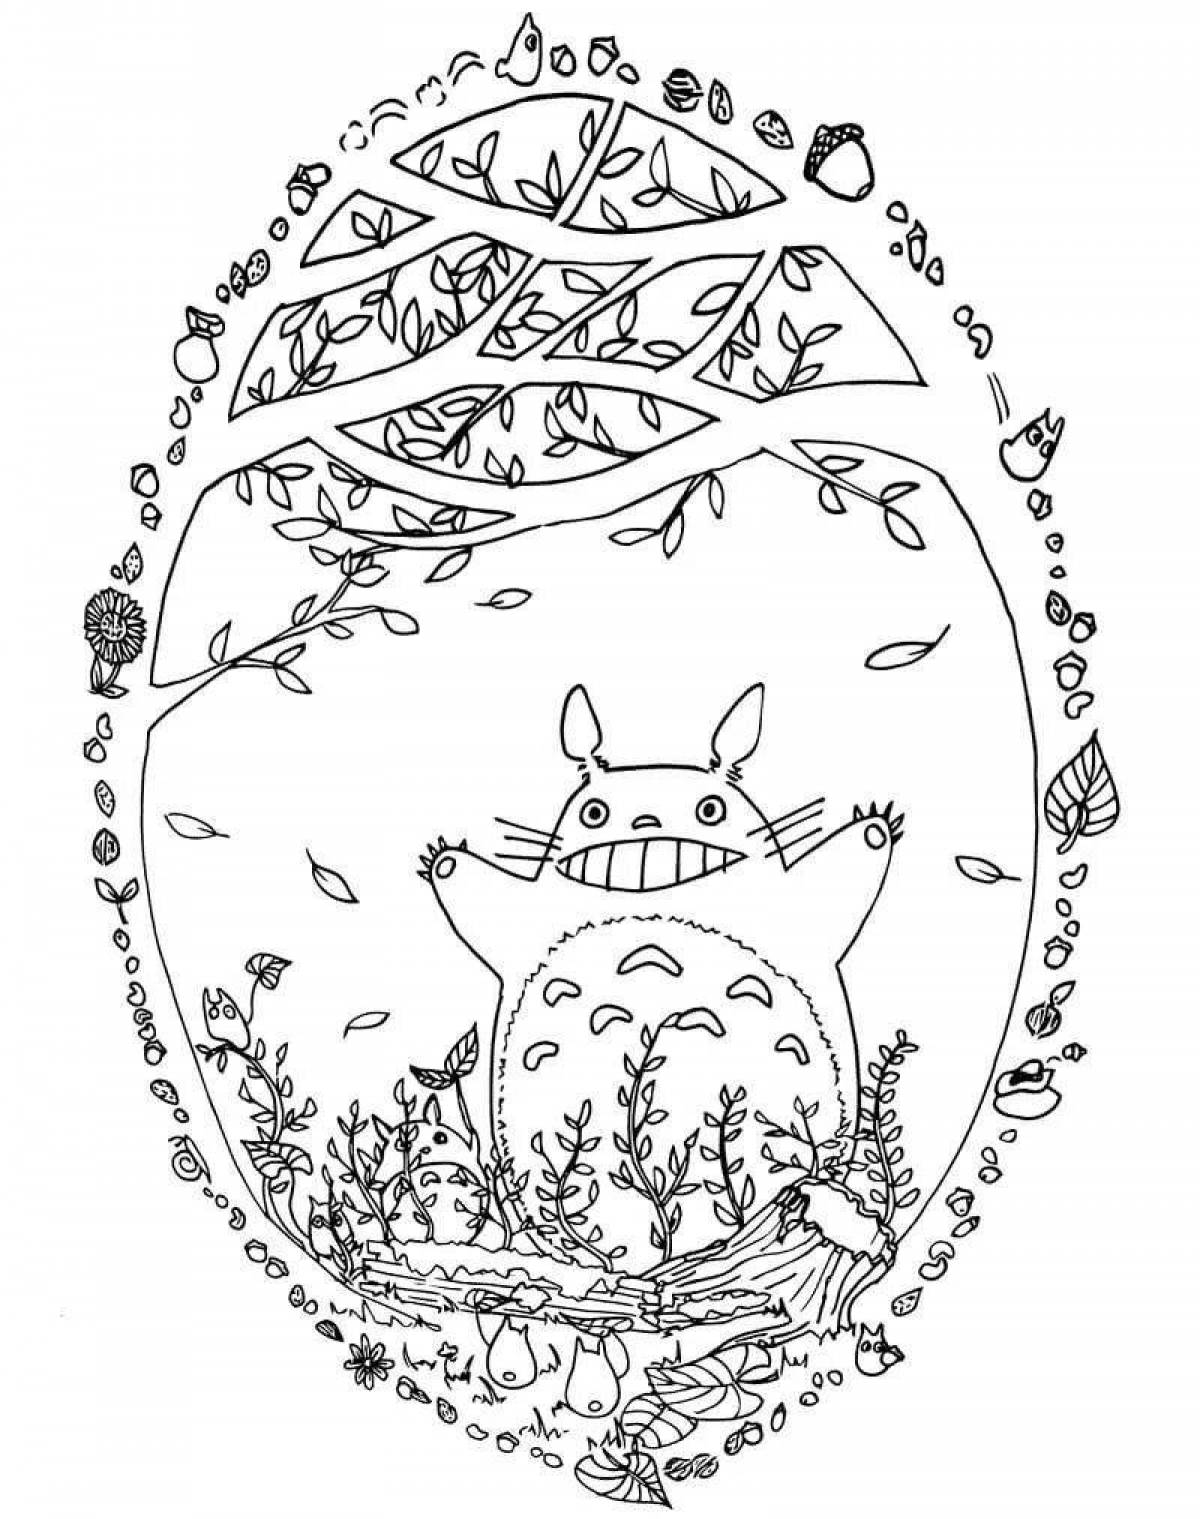 Playful totoro coloring page